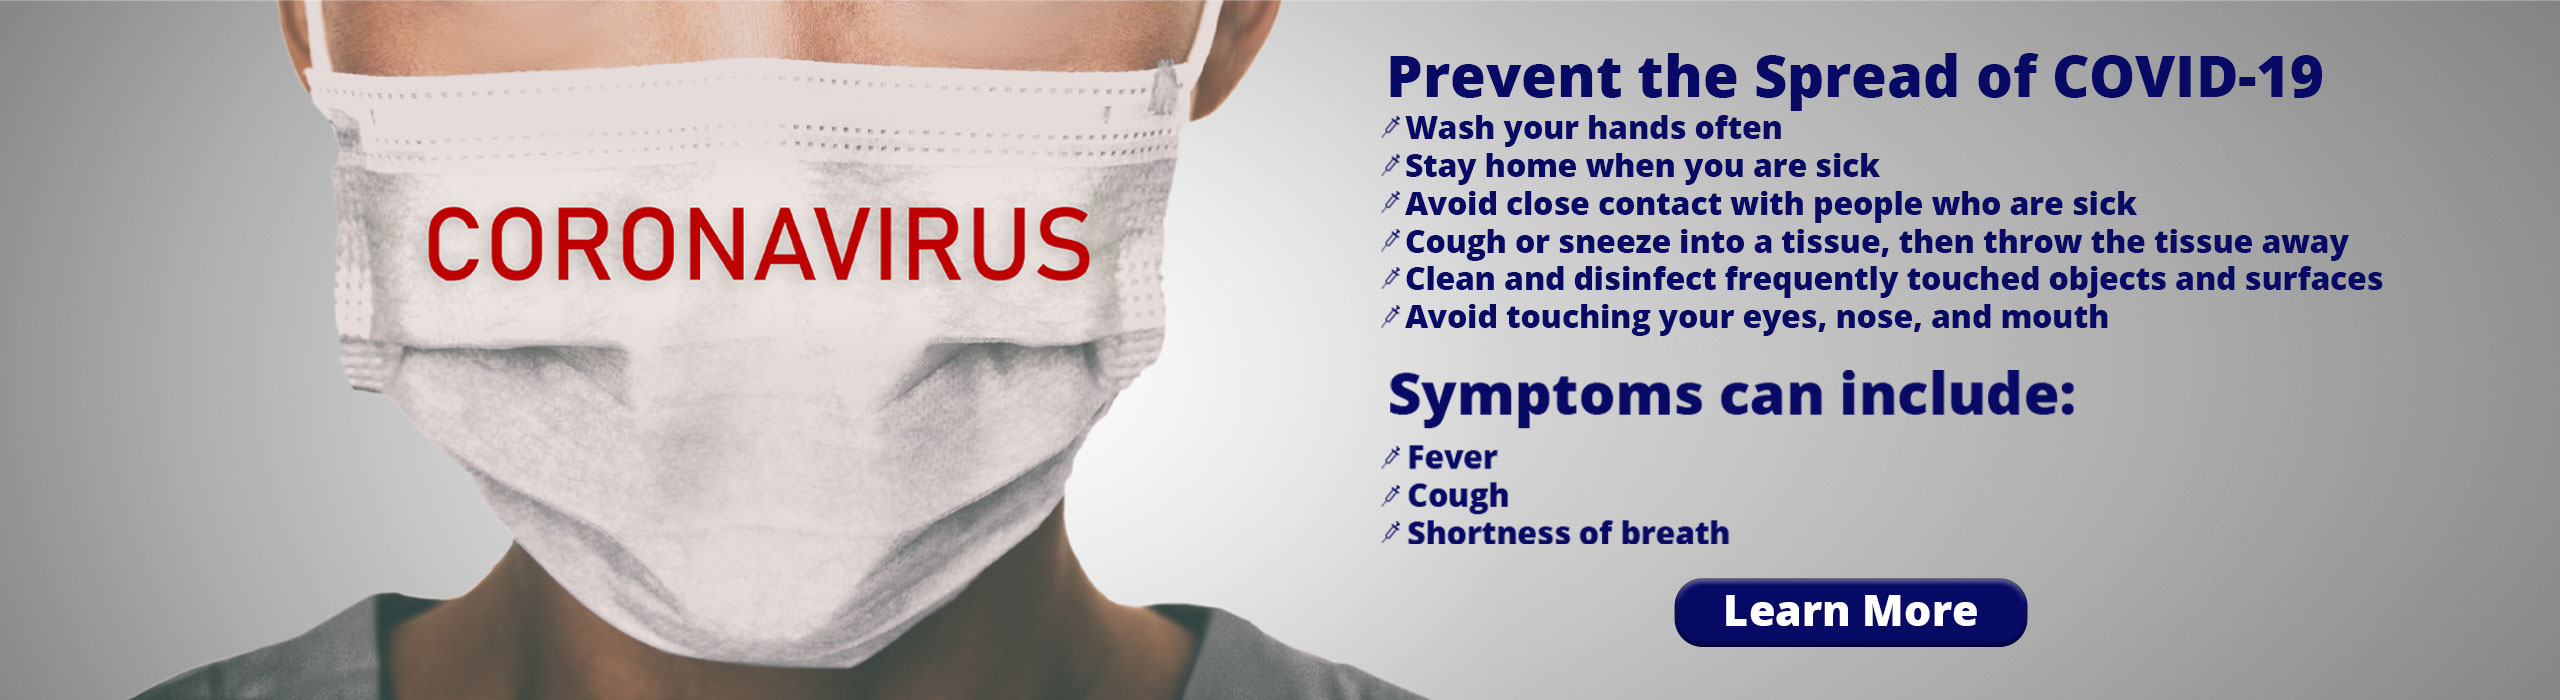 Banner picture of a nurse wearing a mask- It has font over it:
CORONAVIRUS

Prevent the Spread of COVID-19
	Wash your hands often
	Stay home when you are sick
	Avoid close contact with people who are sick
	Cough or sneeze into a tissue, then throw the tissue away
	Clean and disinfect frequently touched objects and surfaces
	Avoid touching your eyes, nose, and mouth

Symptoms include: Fever, Cough, Shortness of breath